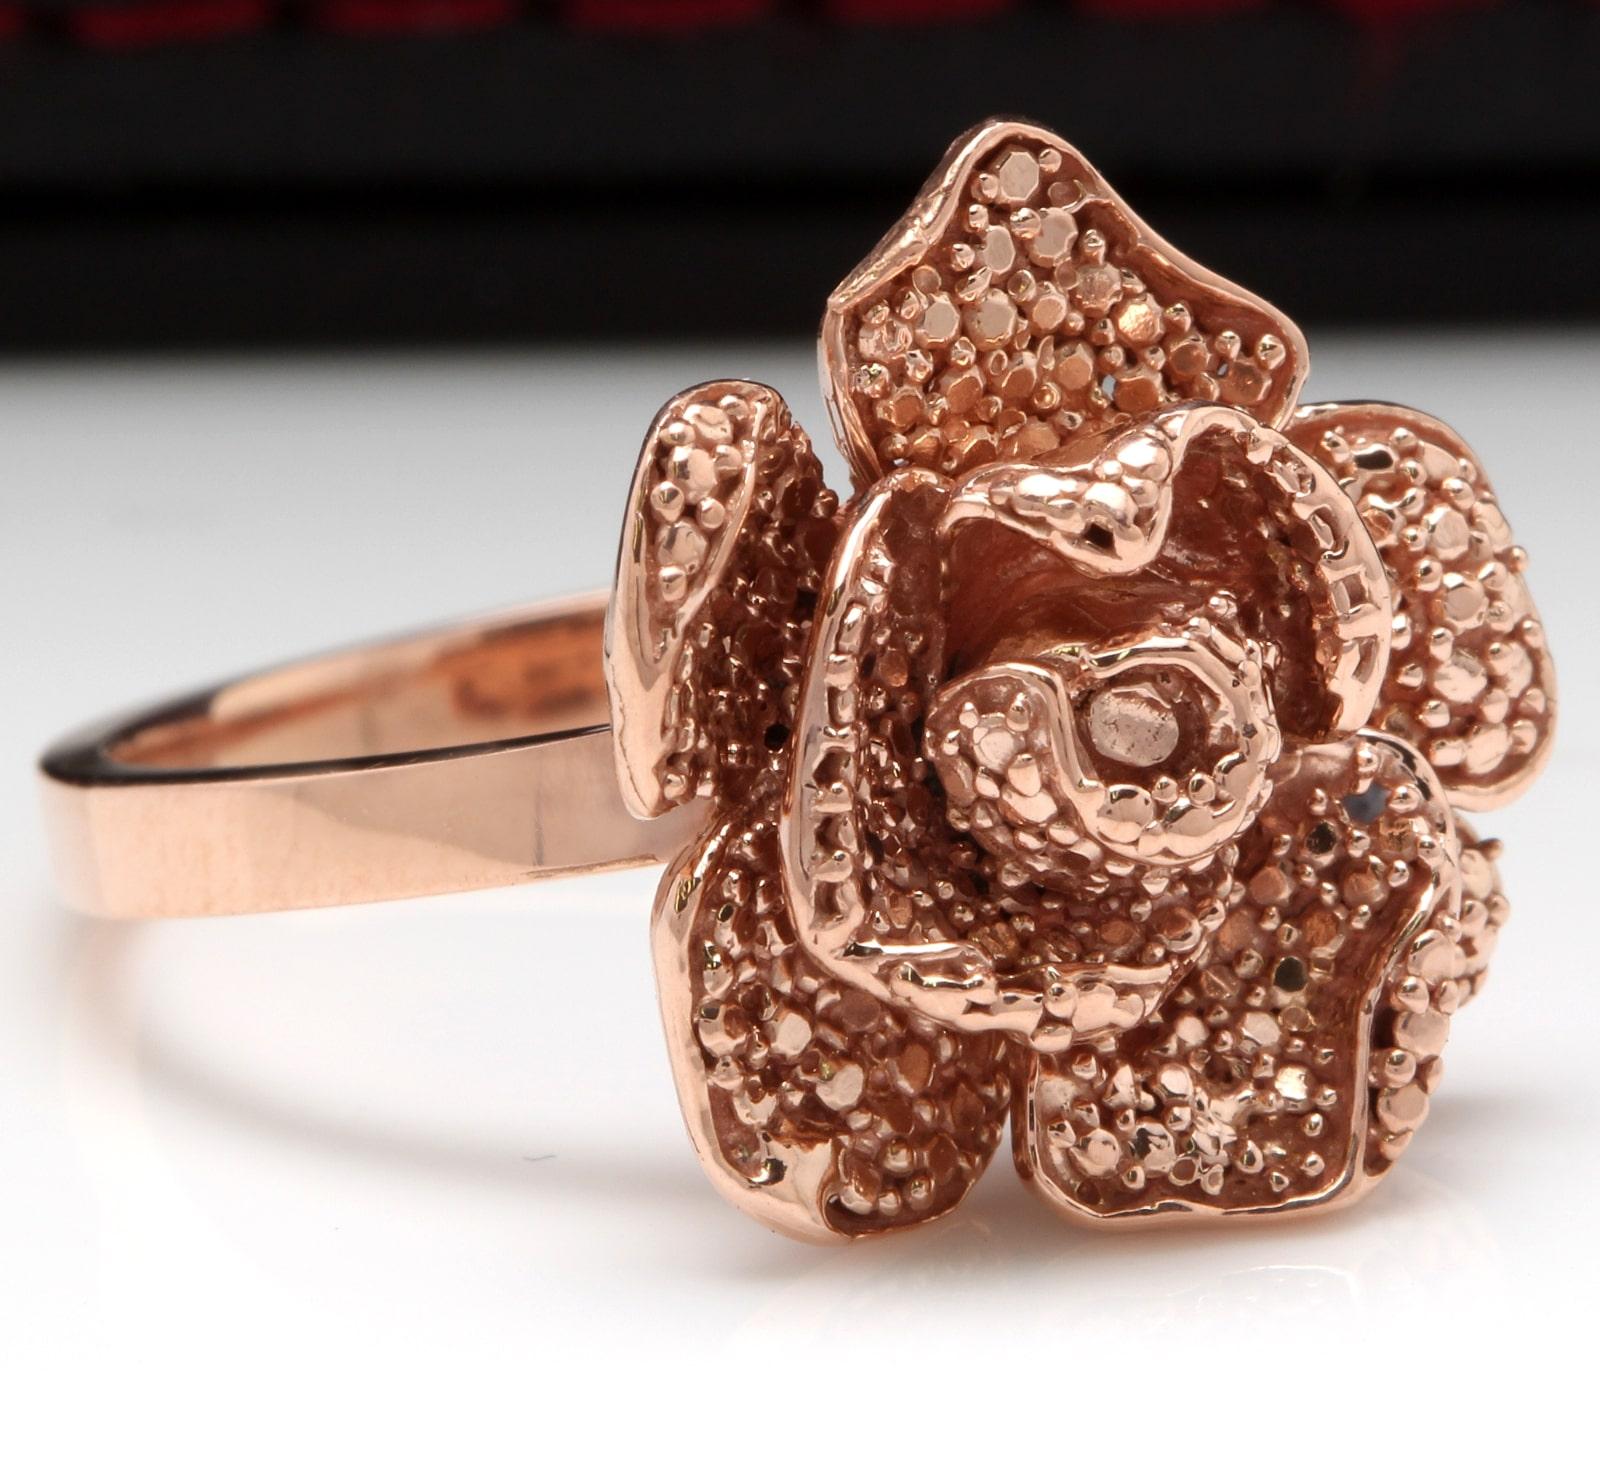 Beautiful 14K Solid Rose Gold Flower Ring

Suggested Replacement Value: $1,300.00

Stamped: 14K

Flower Measures: 16.60 x 16.25mm

Ring size: 6.5 (free sizing available)

Item total weight: 6.1 grams

Disclaimer: all weights, measurements and colors